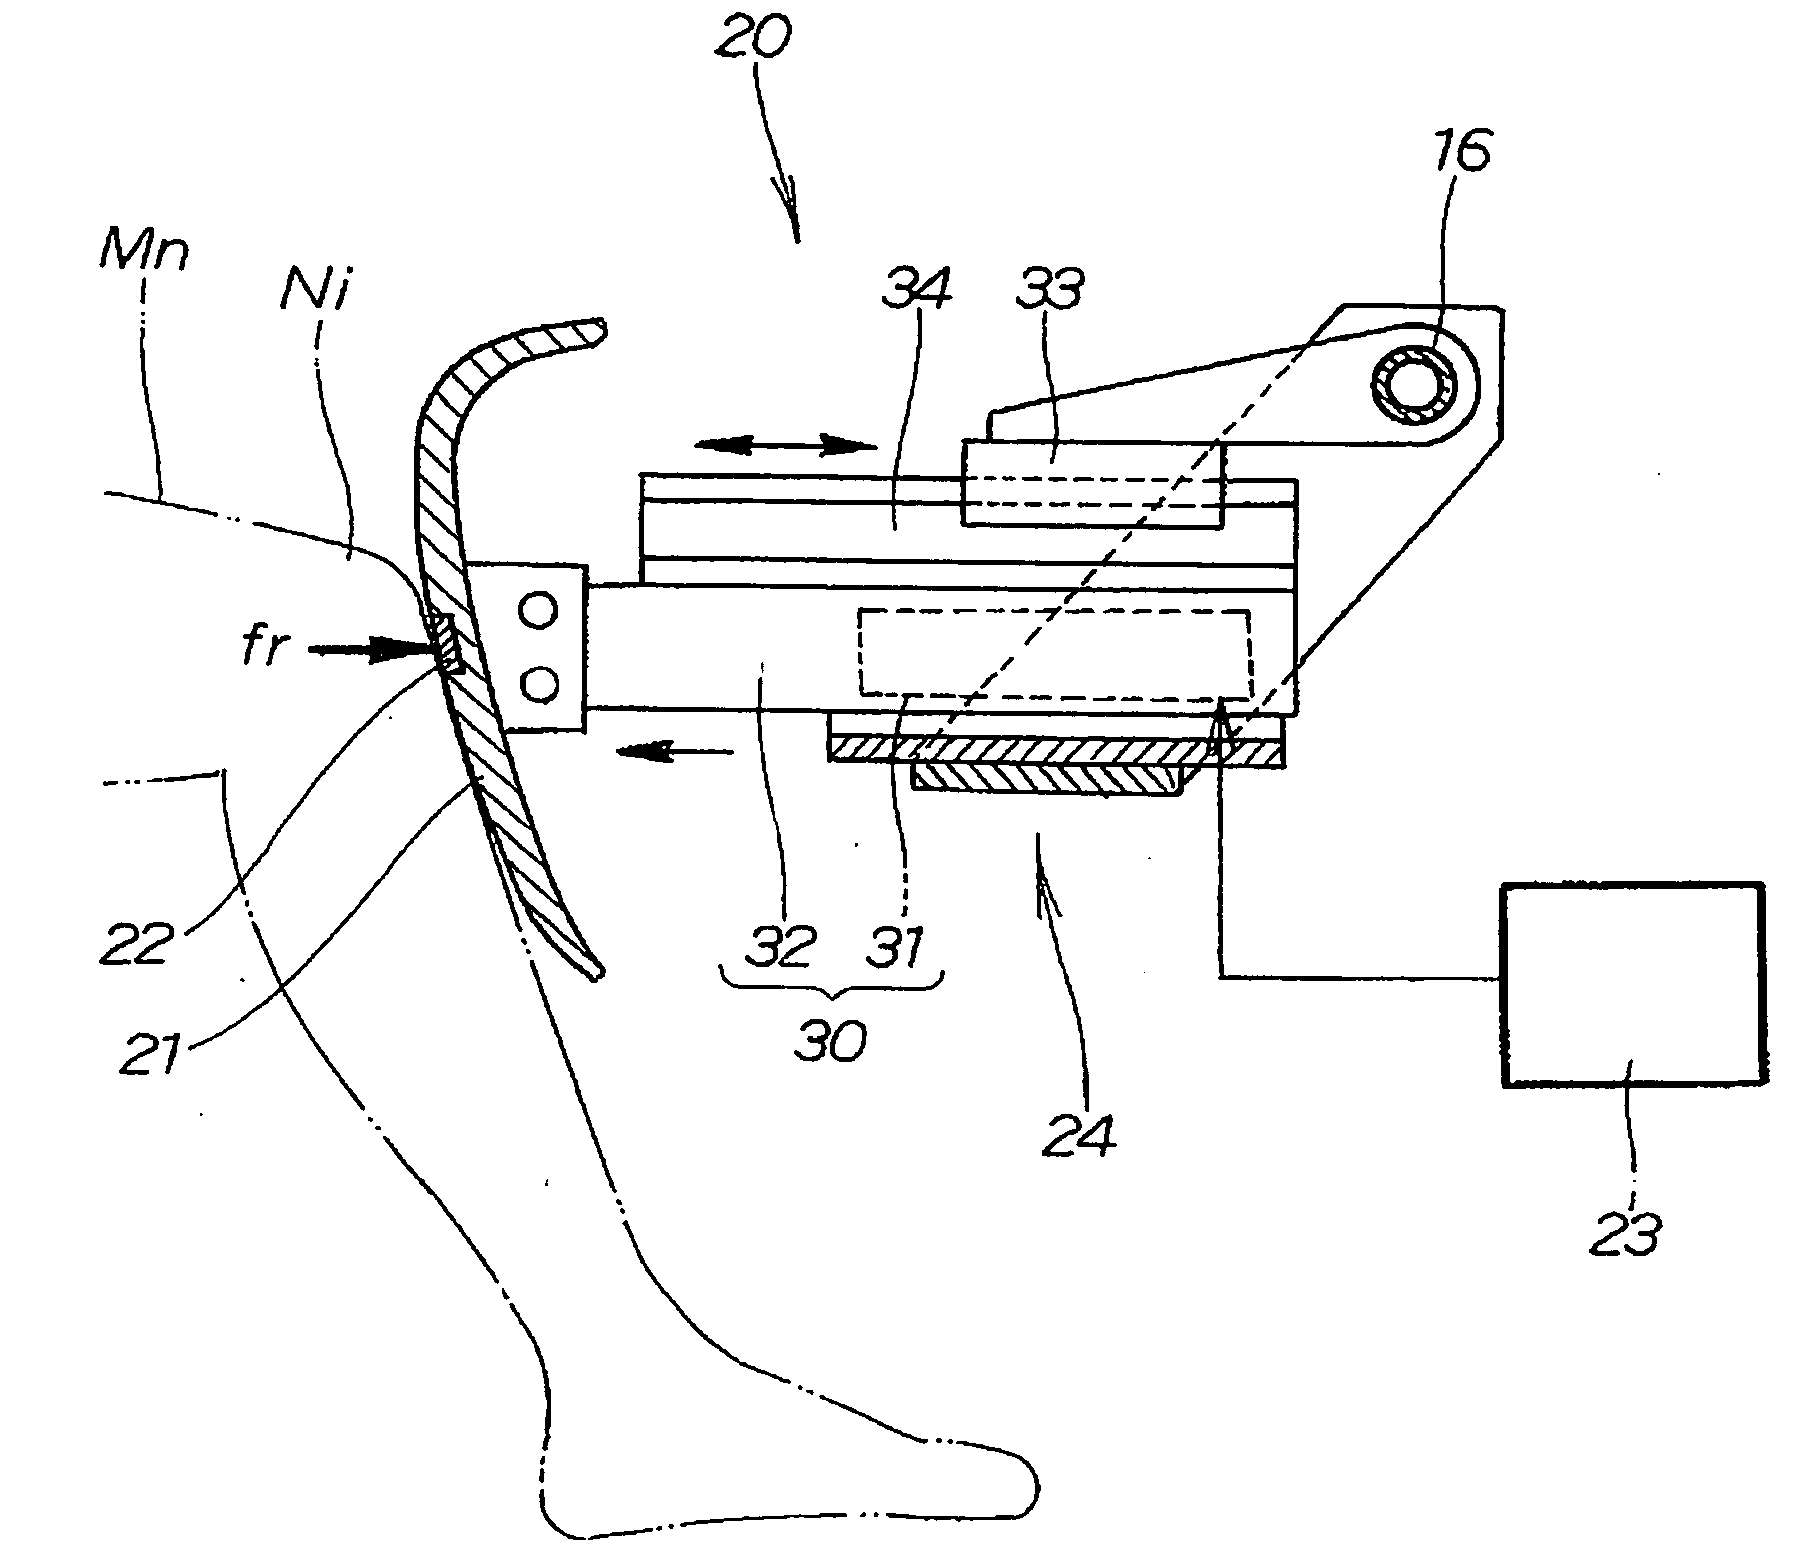 Vehicle occupant knee protection apparatus